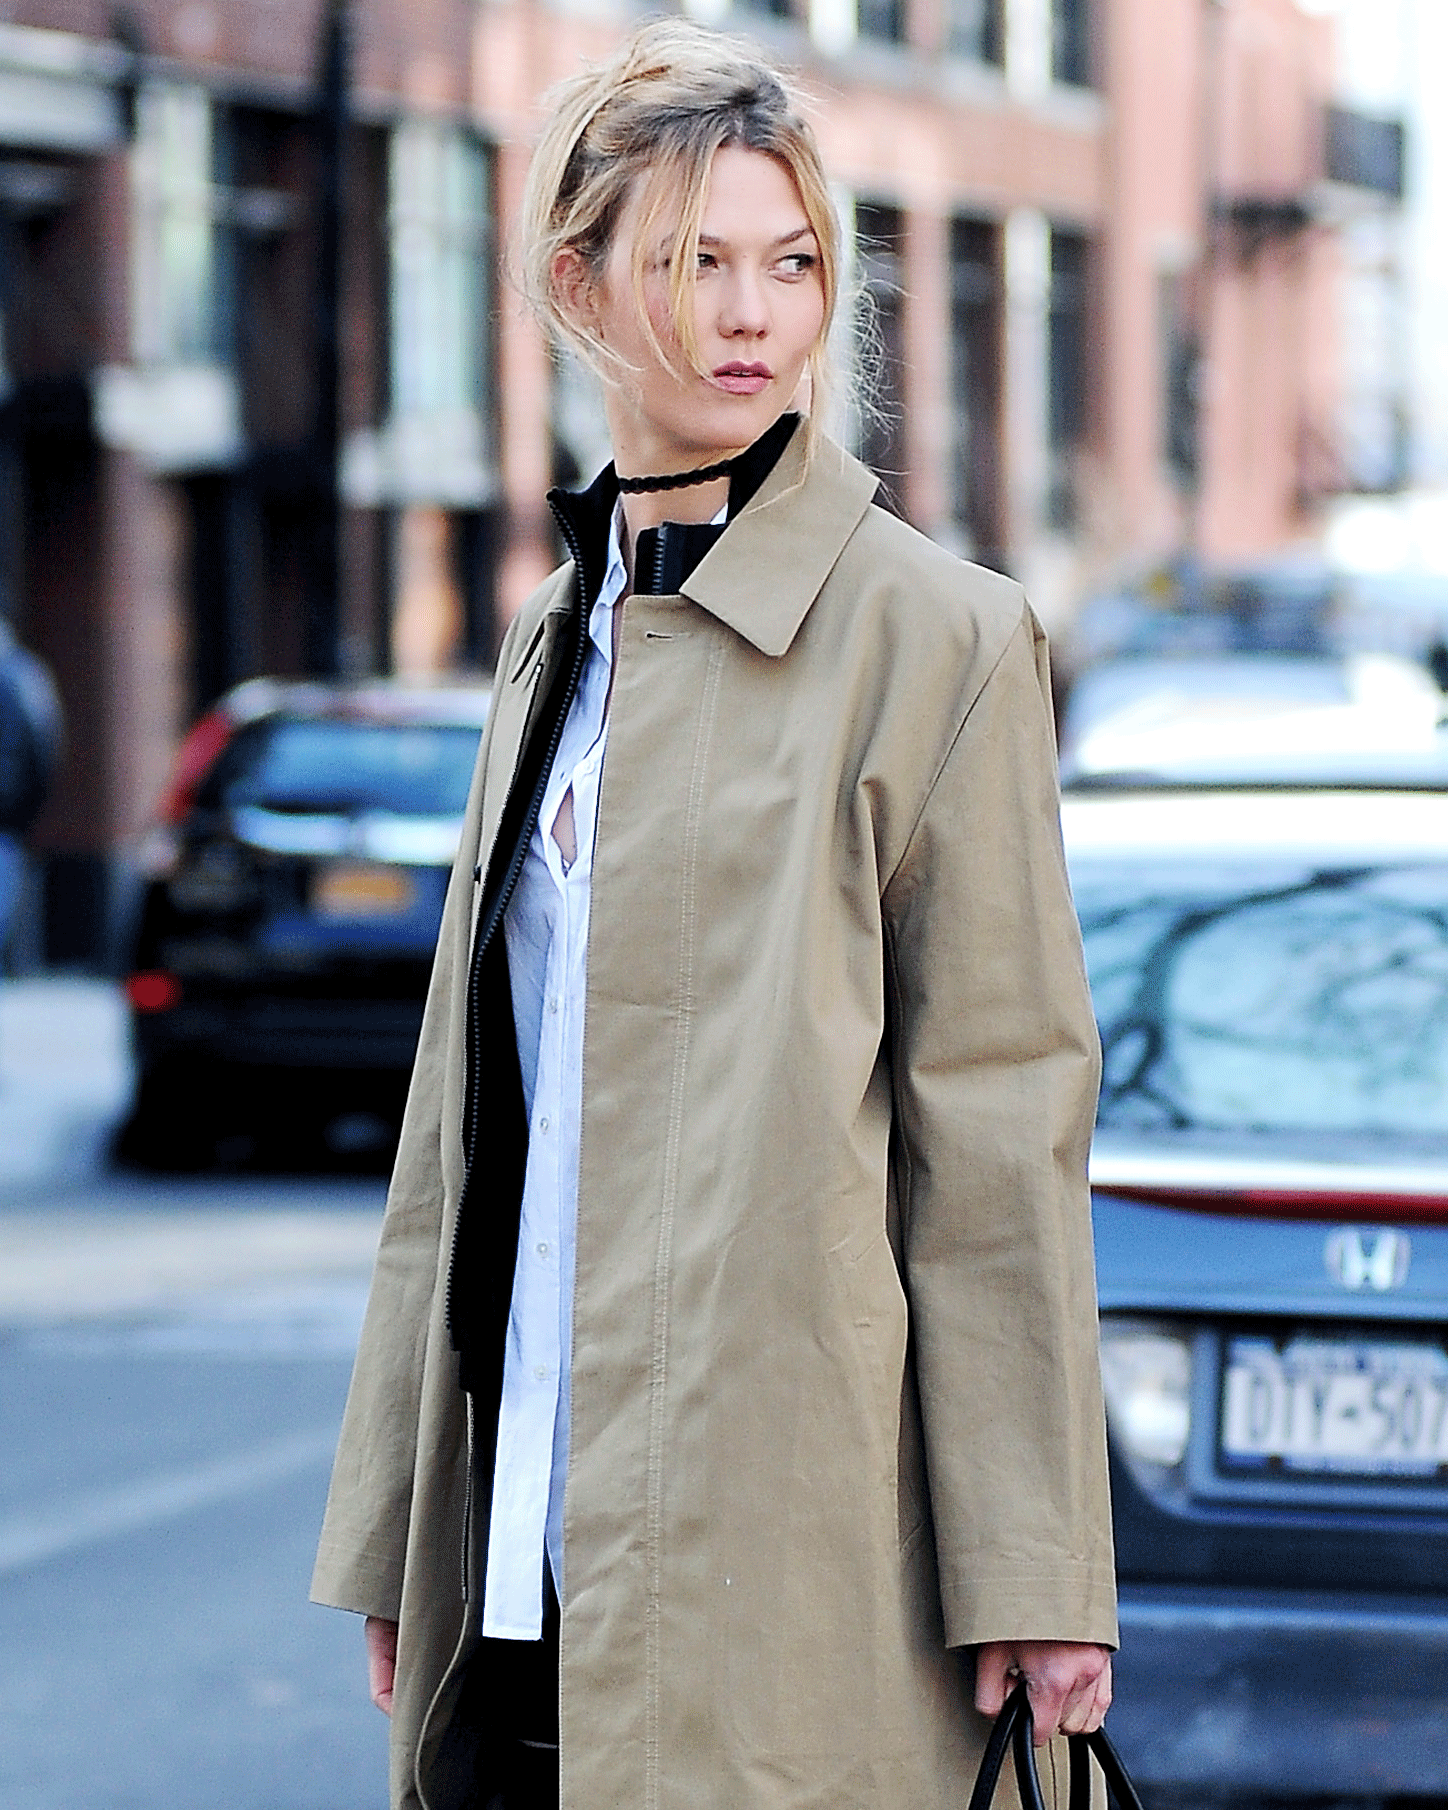 Karlie Kloss in a trench coat and white shirt